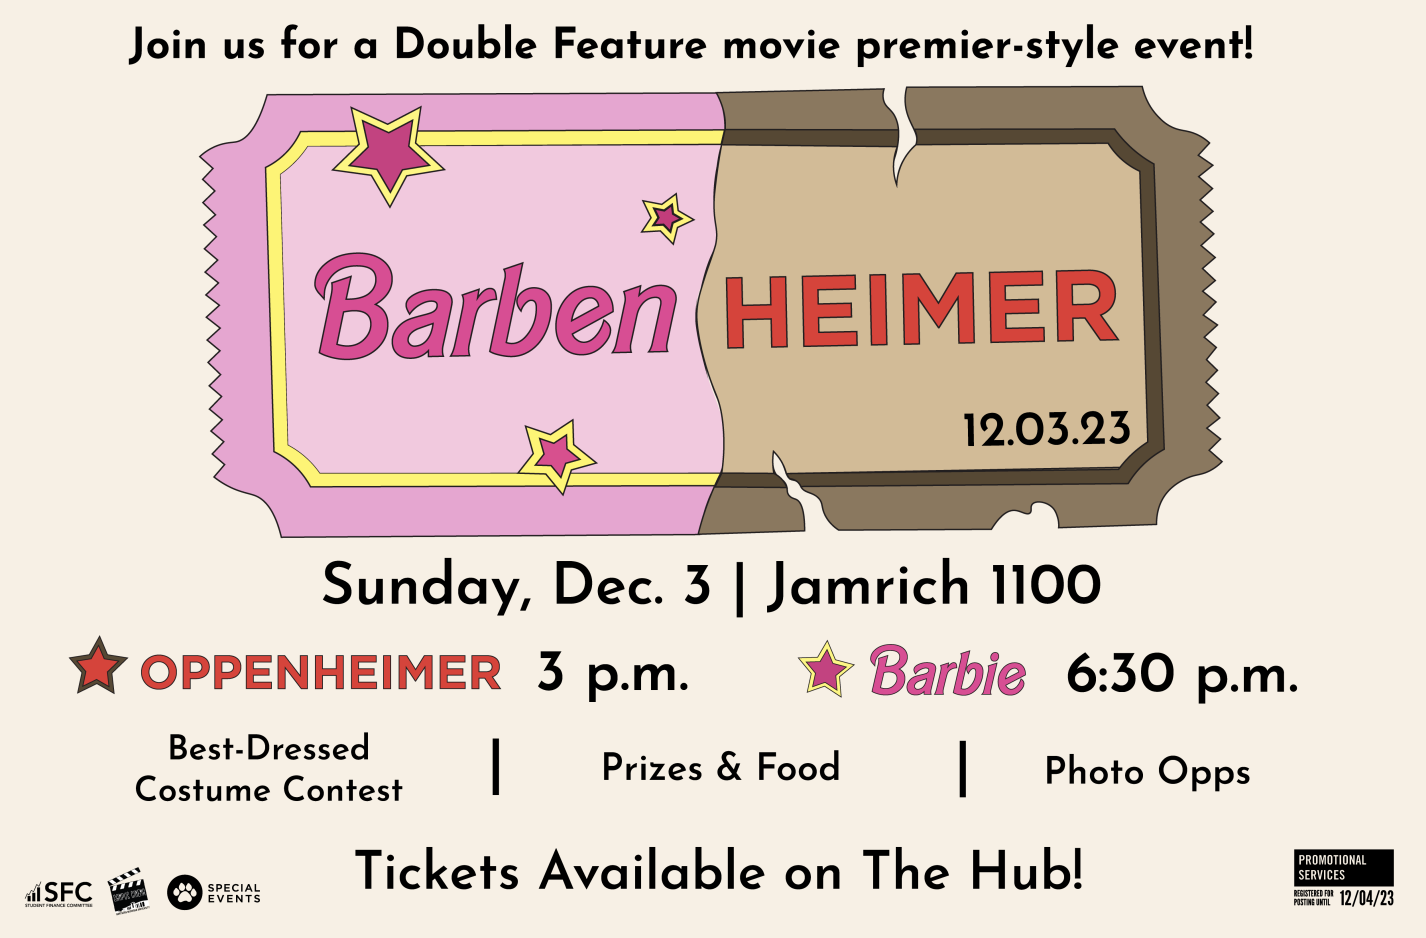 PINK EXPLOSION — With the help of the Special Events Committee, Campus Cinema is showing the double feature Barbenheimer with a pink runway experience. Photo courtesy of Izabella Filippelli.